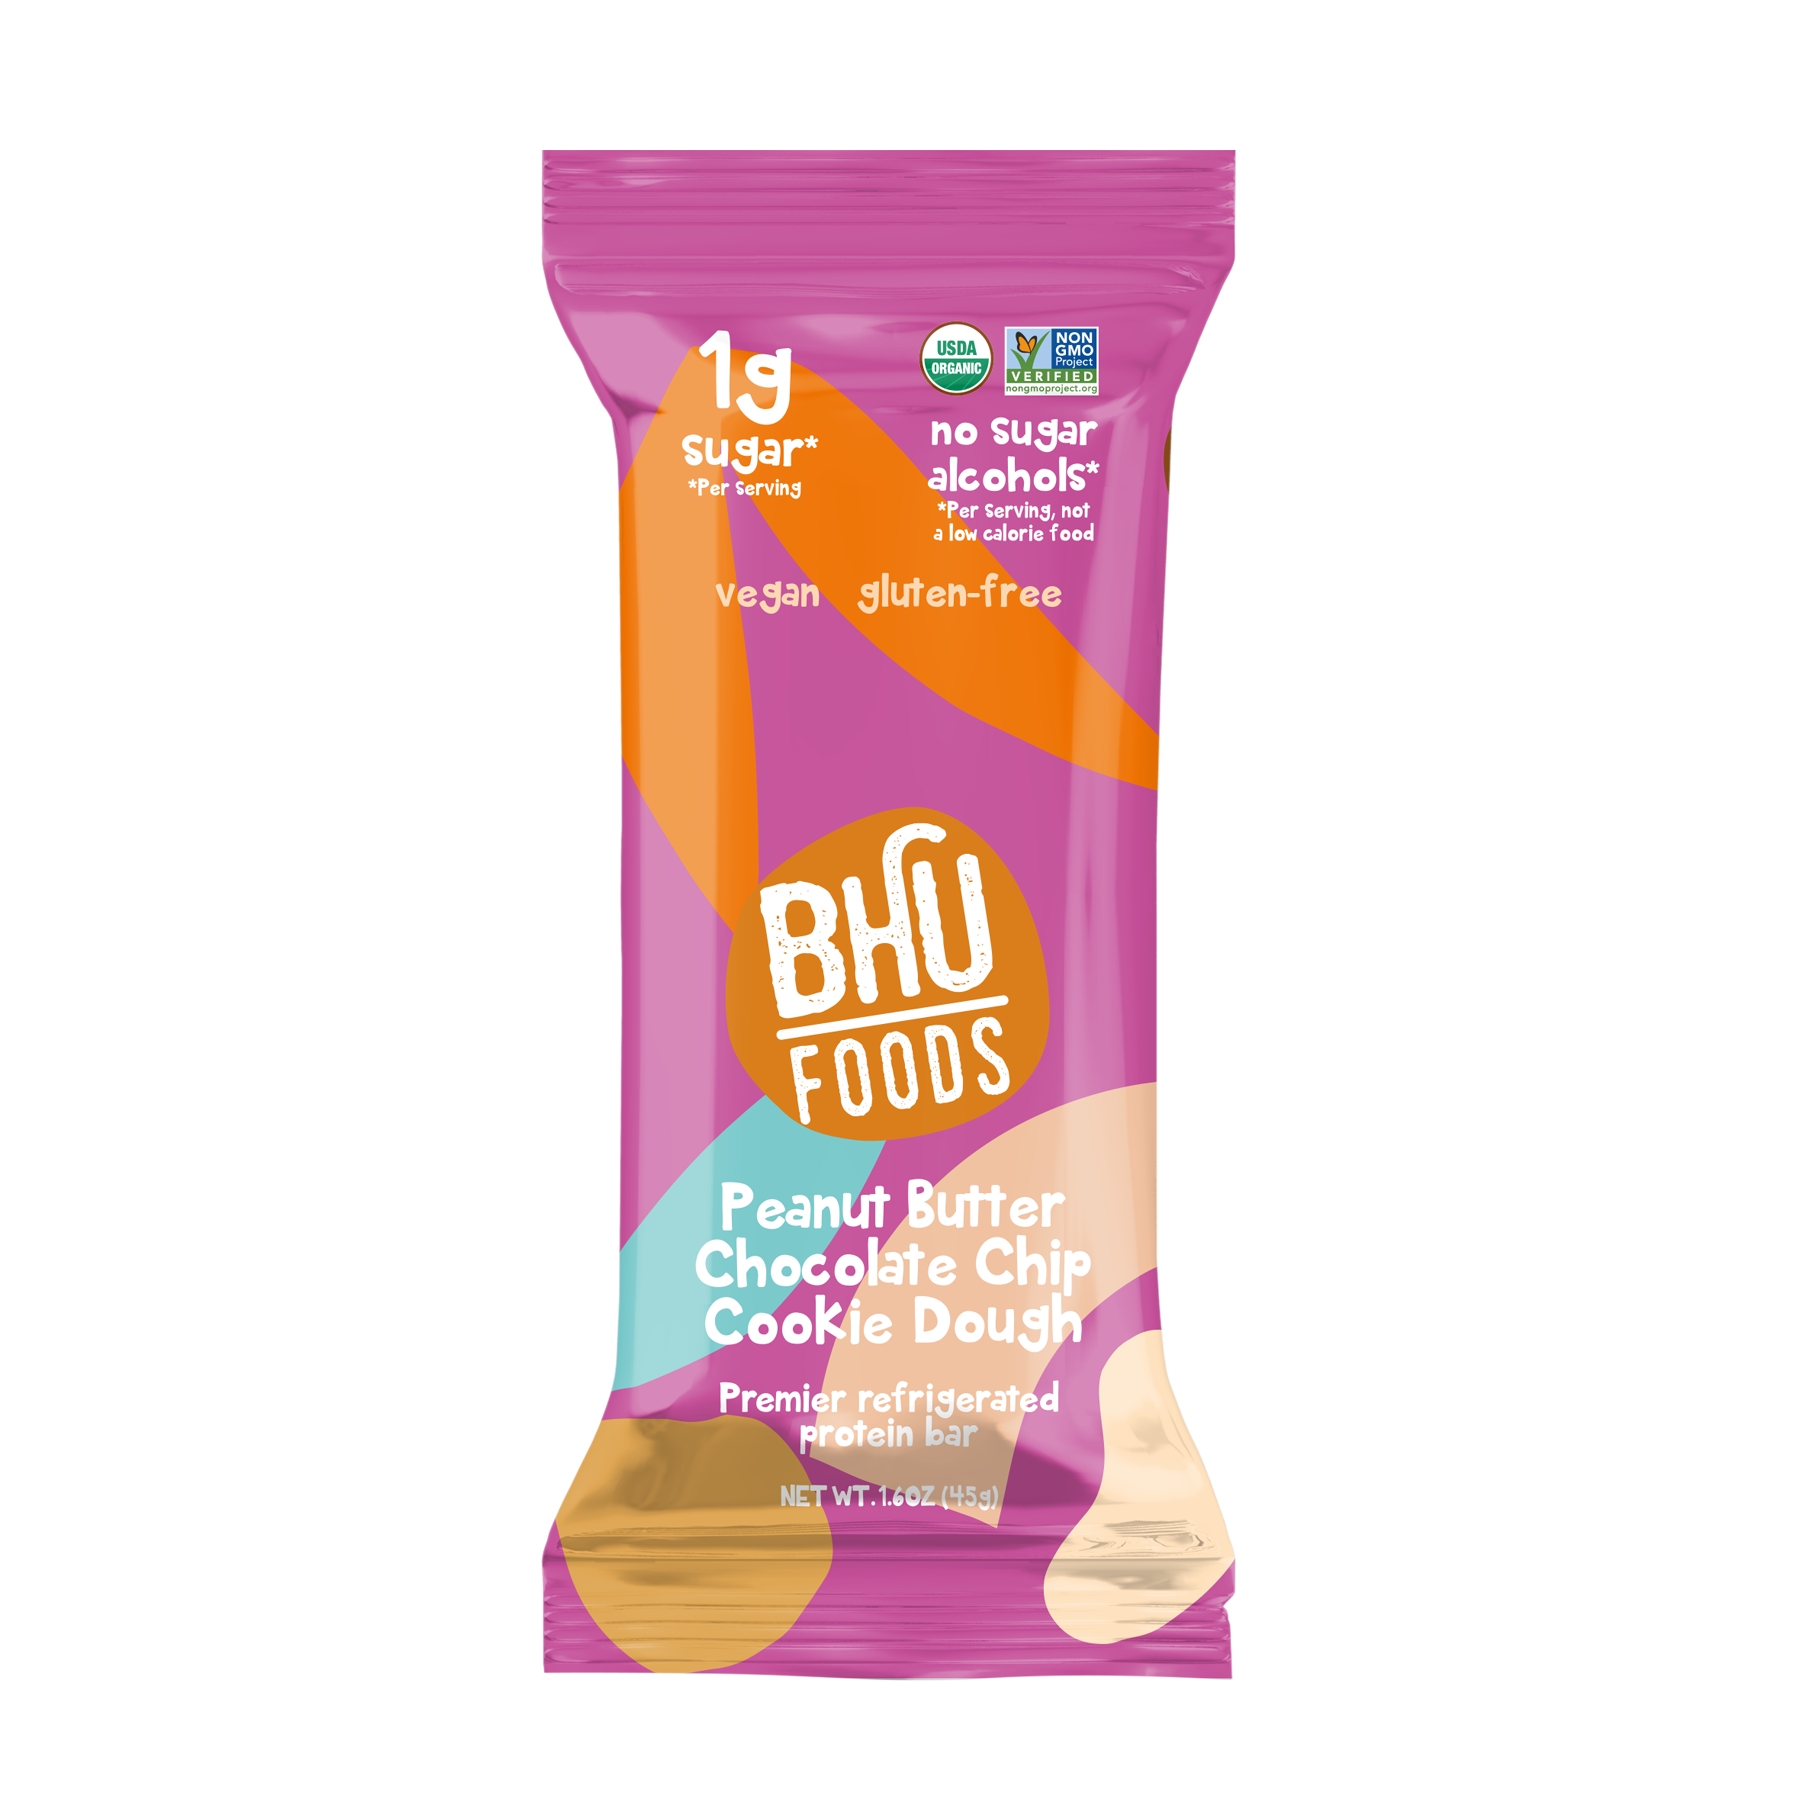 BHU Foods Premier Refrigerated Protein Bar - Peanut Butter Chocolate Chip Cookie Dough 12 innerpacks per case 12.8 oz